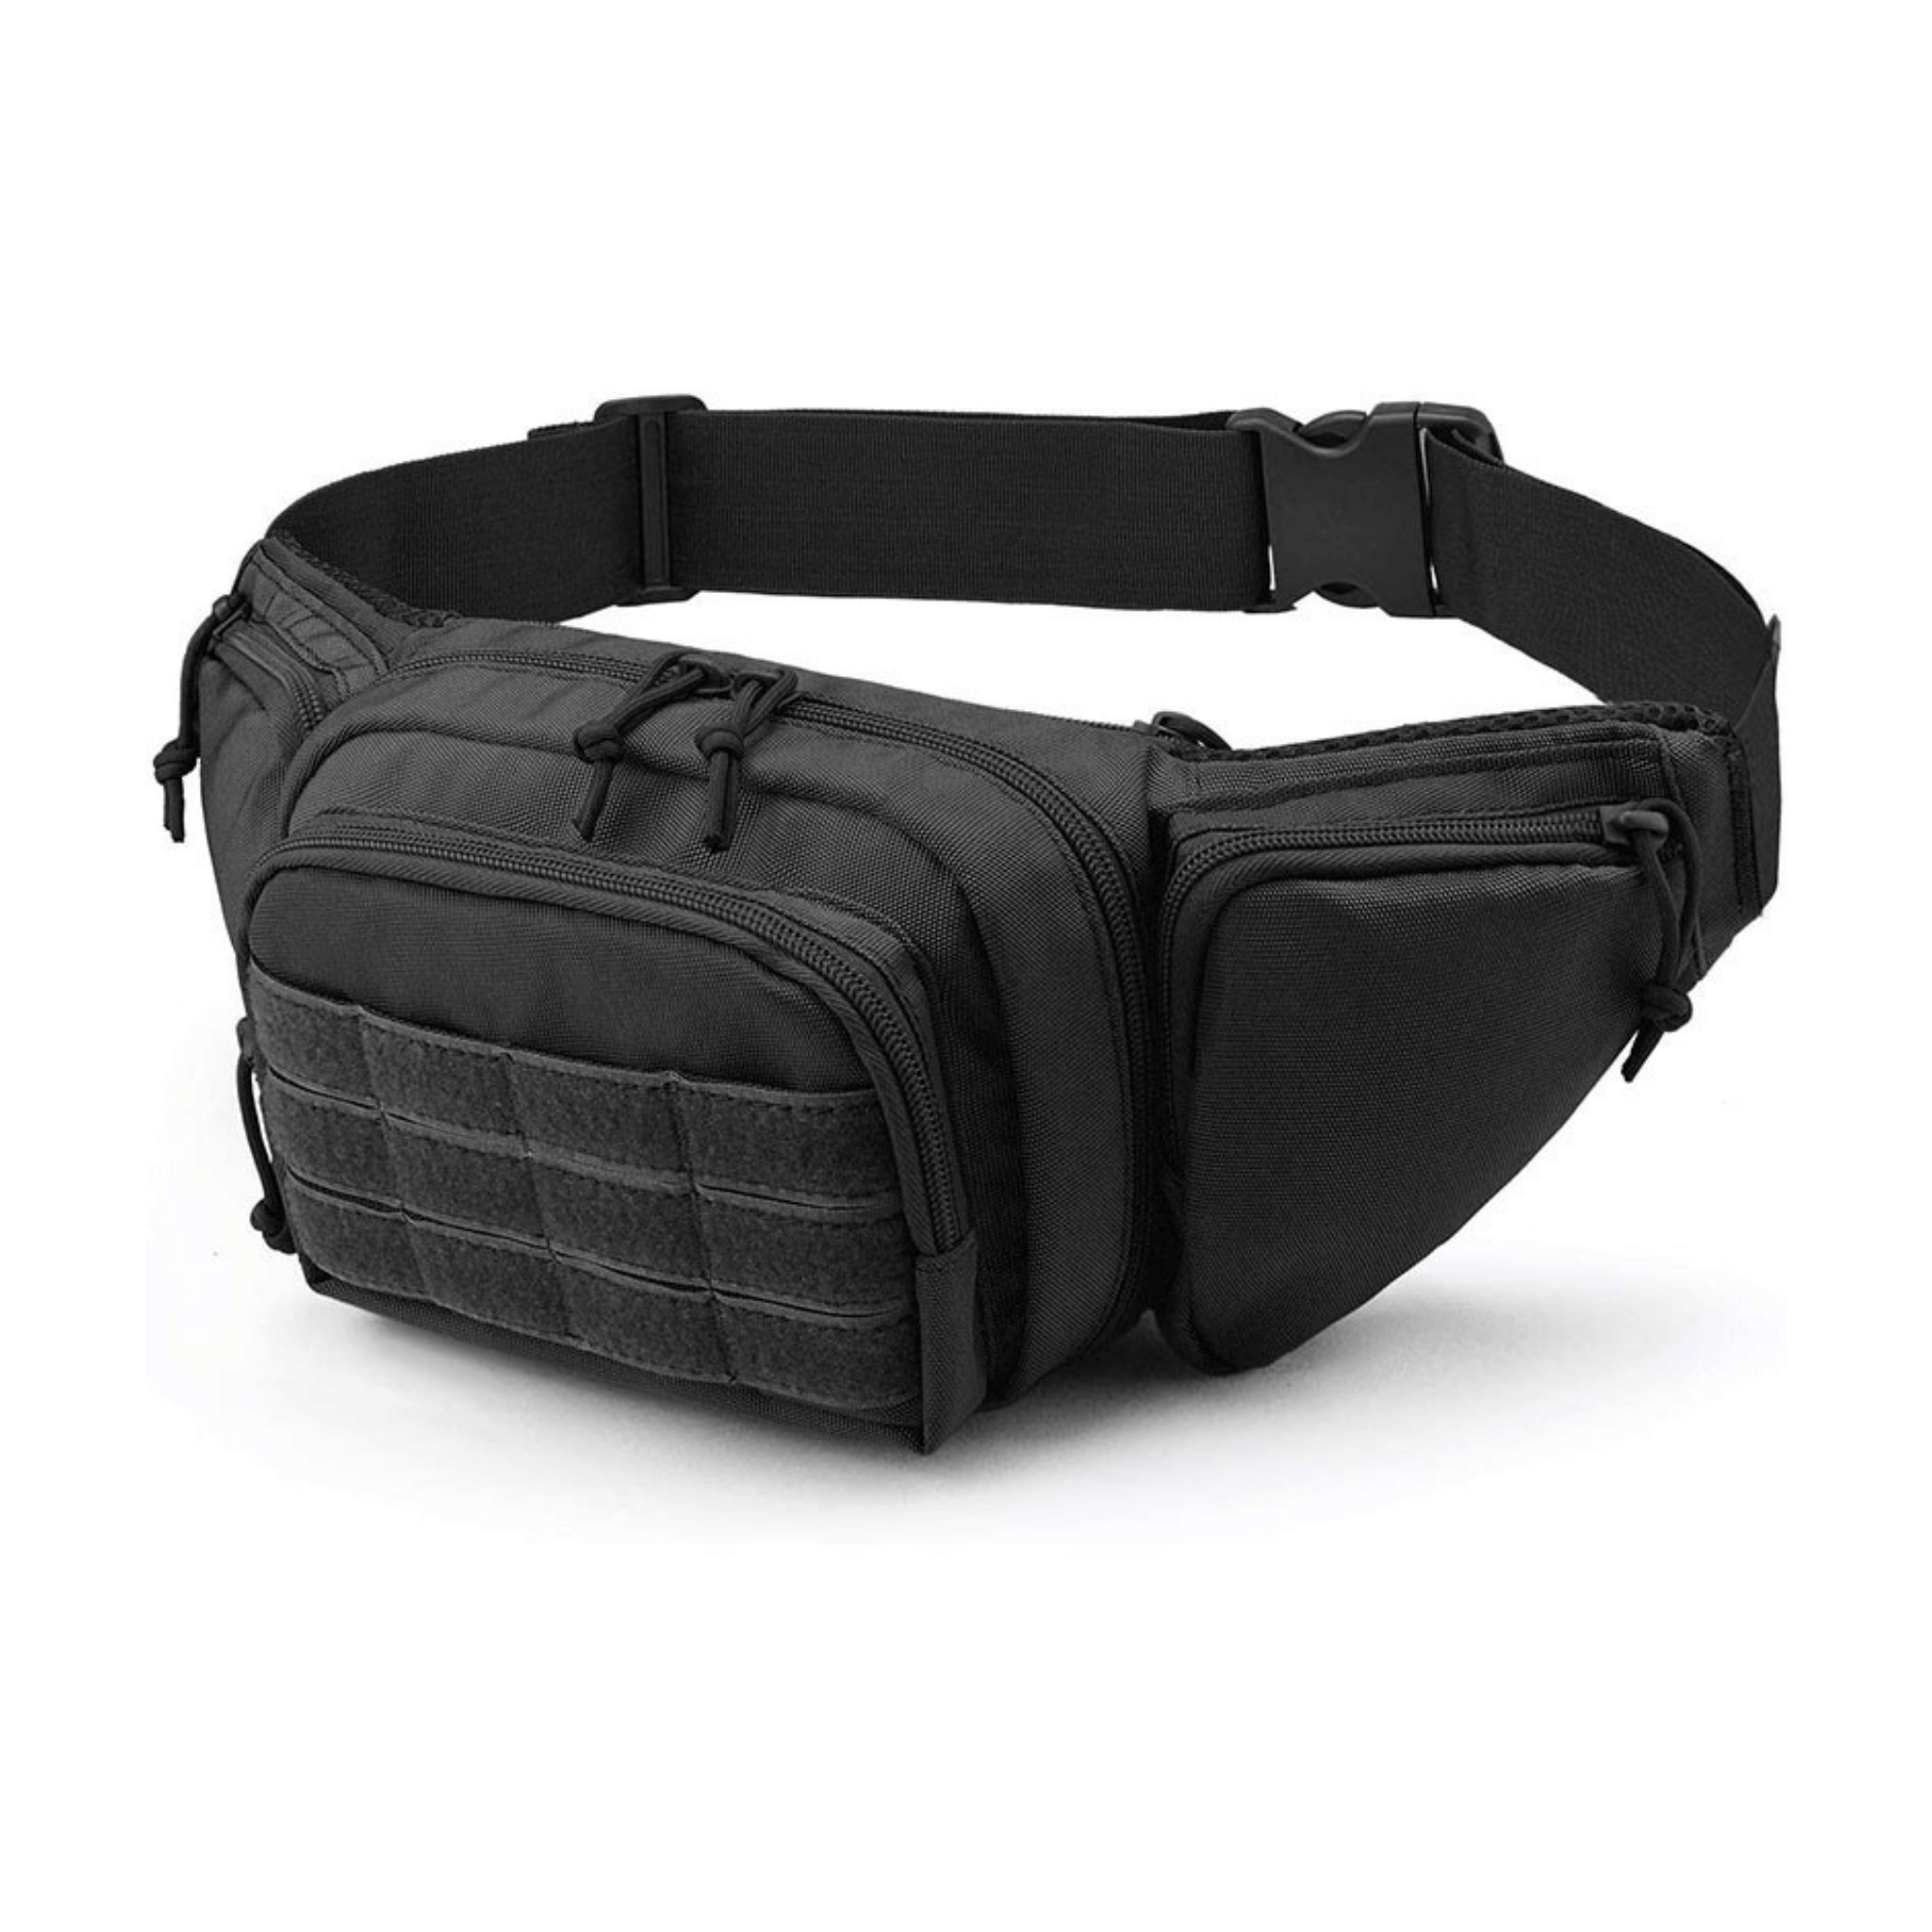 JupiterGear Tactical Military Waist Bag & Molle EDC Pouch for Outdoor Activities - Black